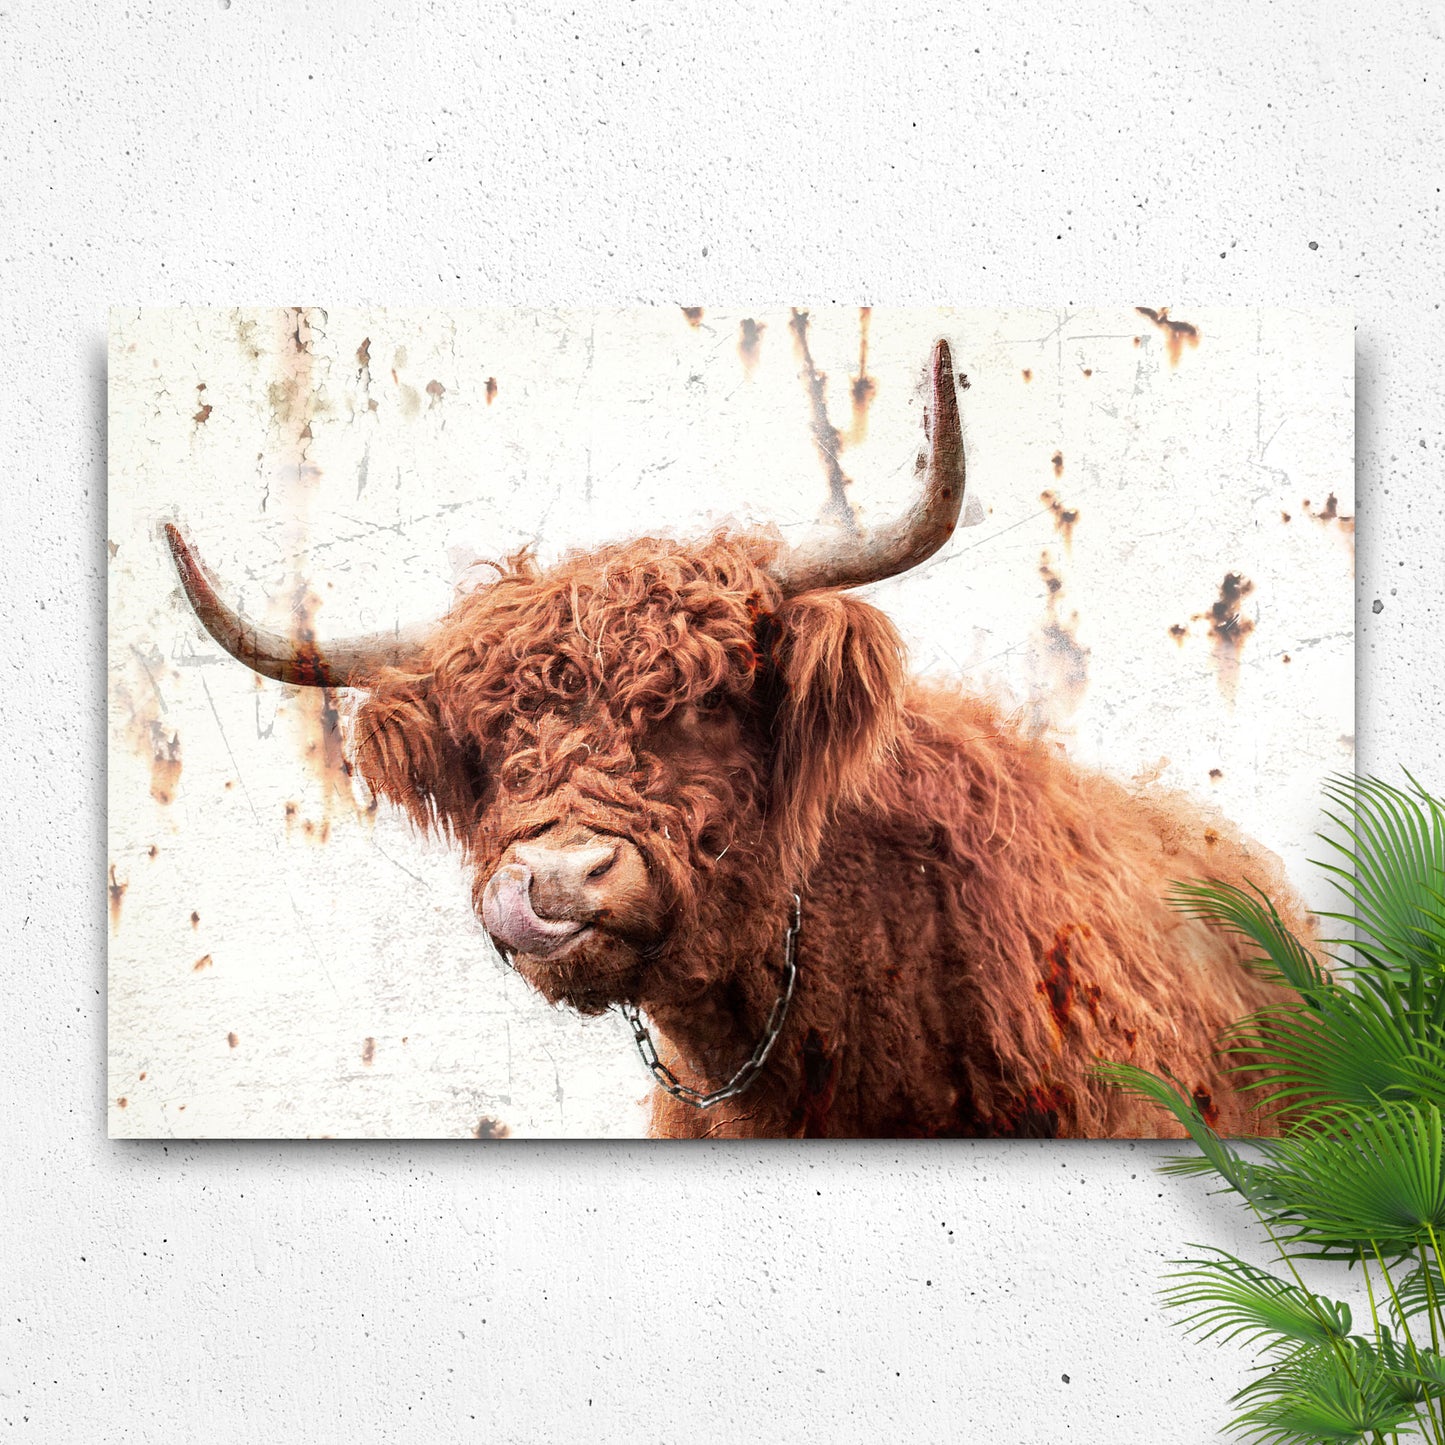 Rustic Highland Cow Canvas Wall Art - Image by Tailored Canvases